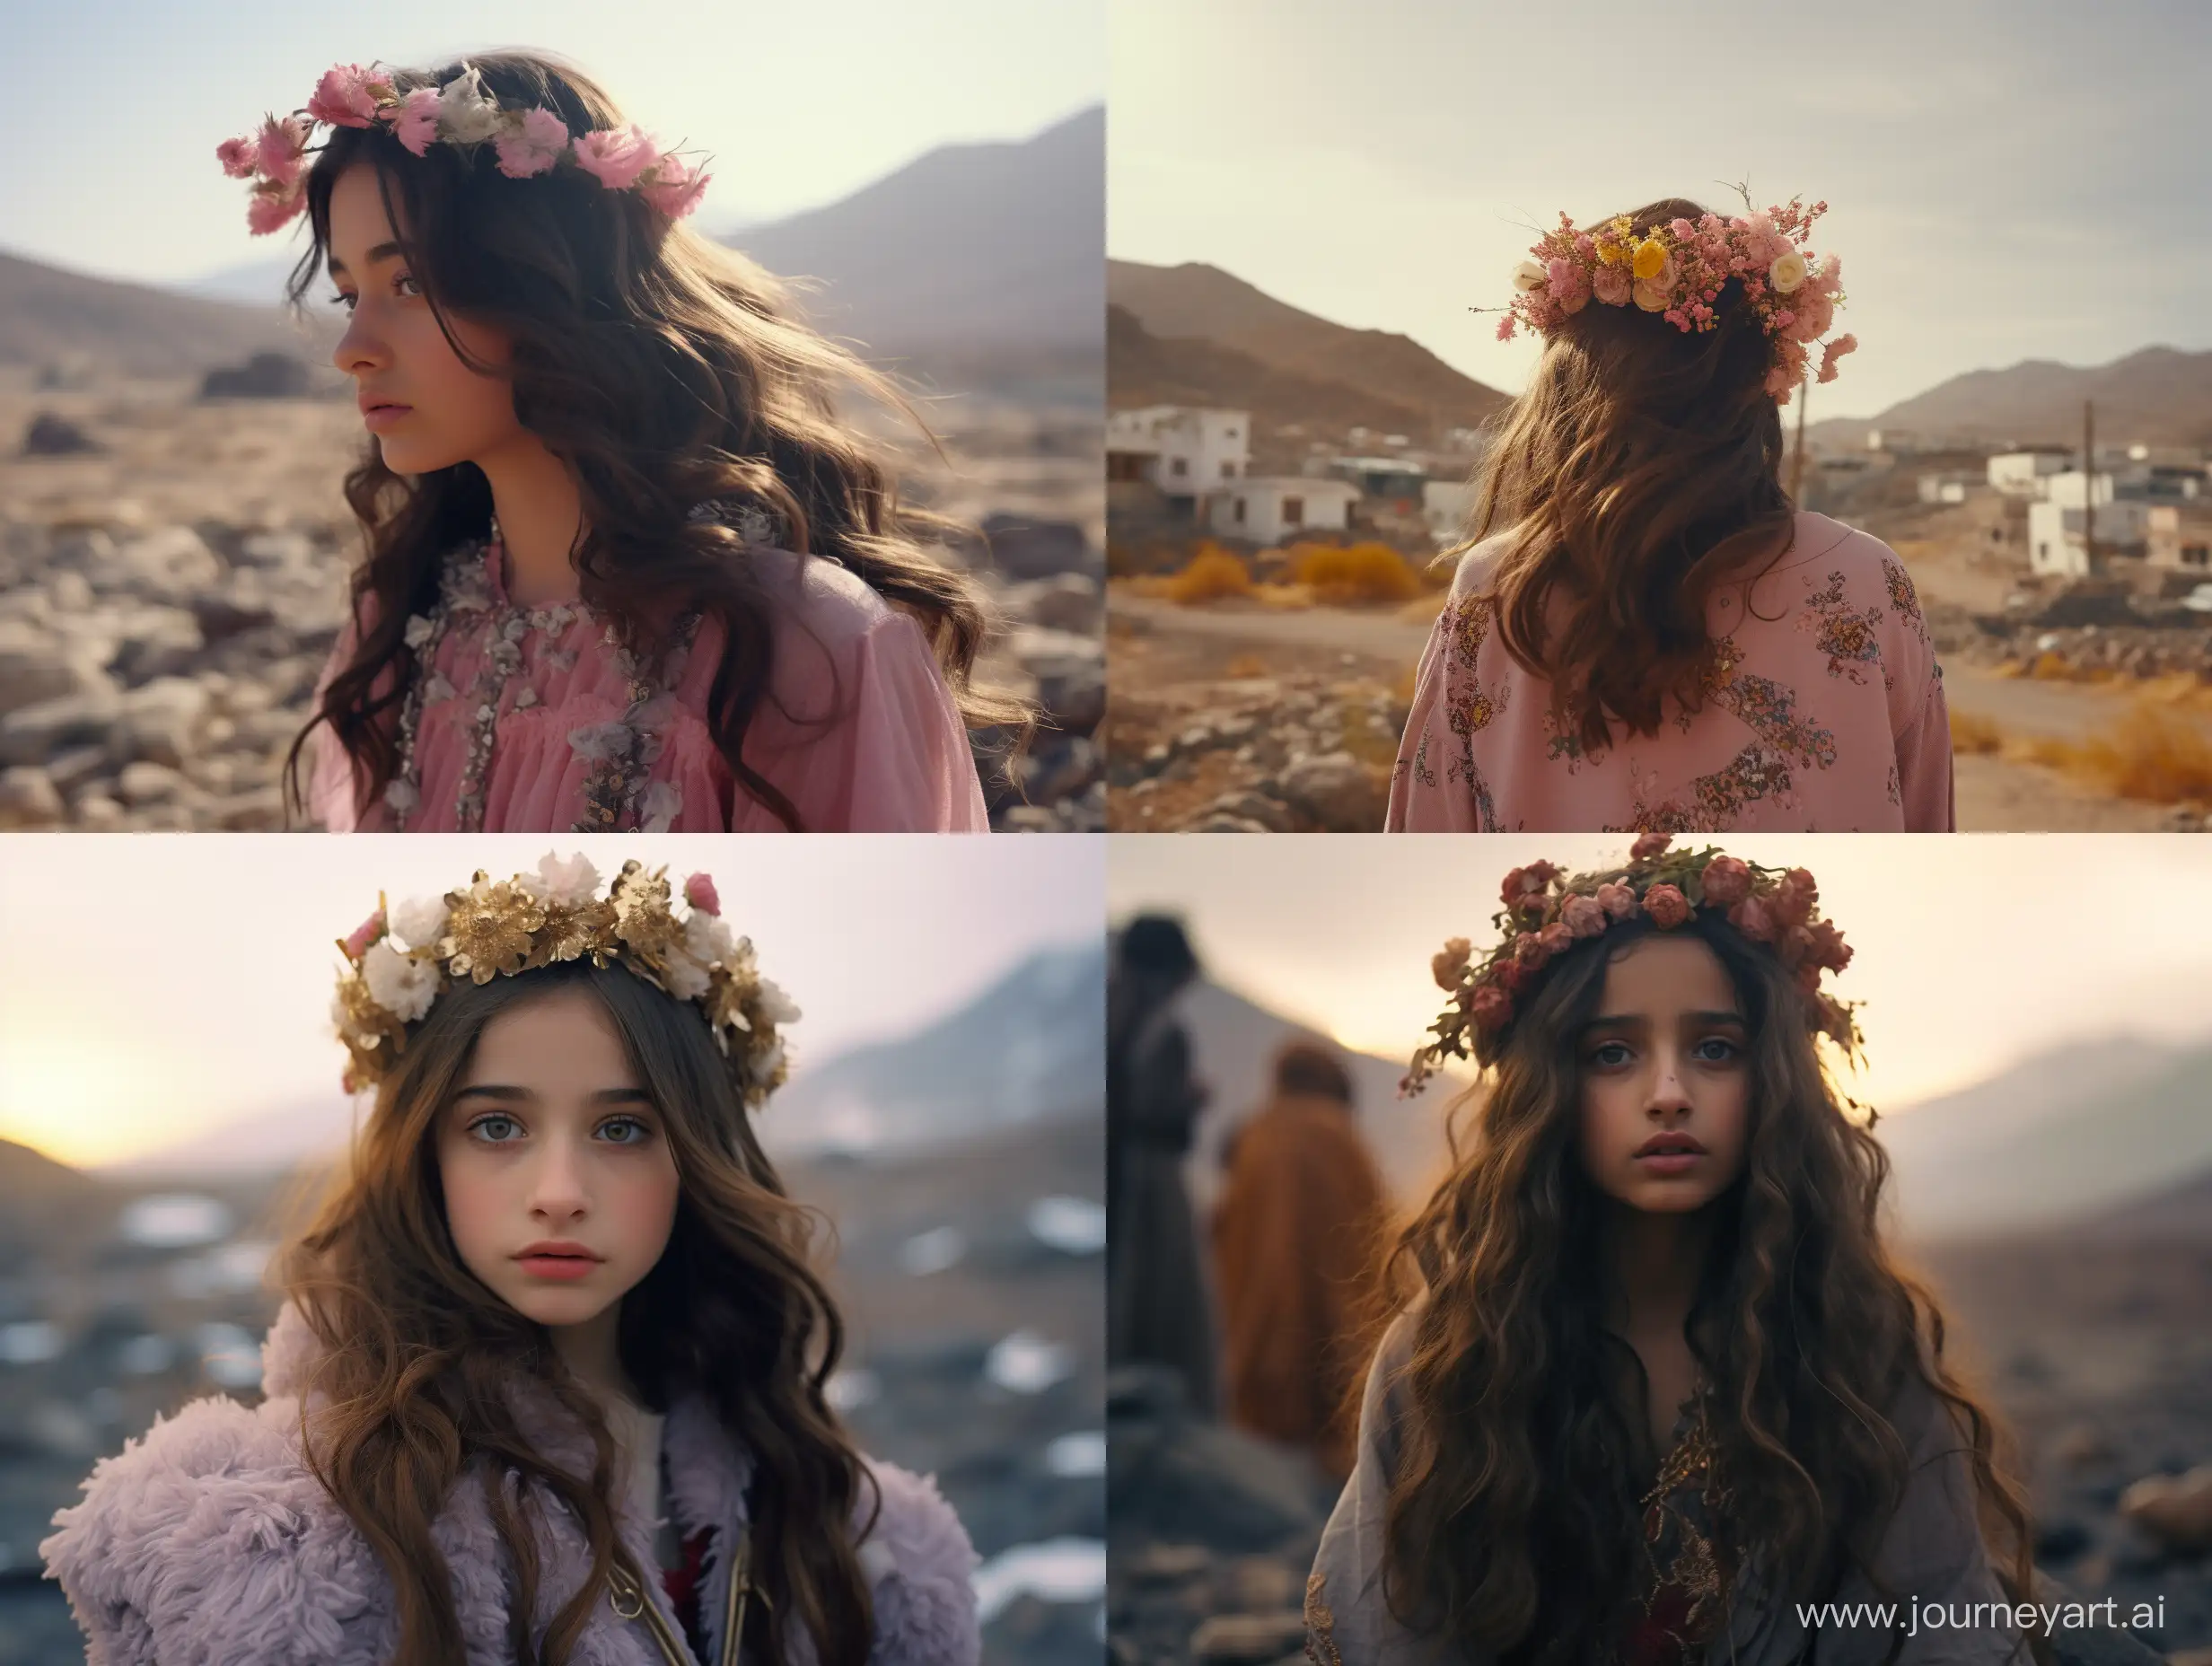 Saudi-Gypsy-Girl-Wearing-Winter-Attire-and-Floral-Crown-in-Taif-City